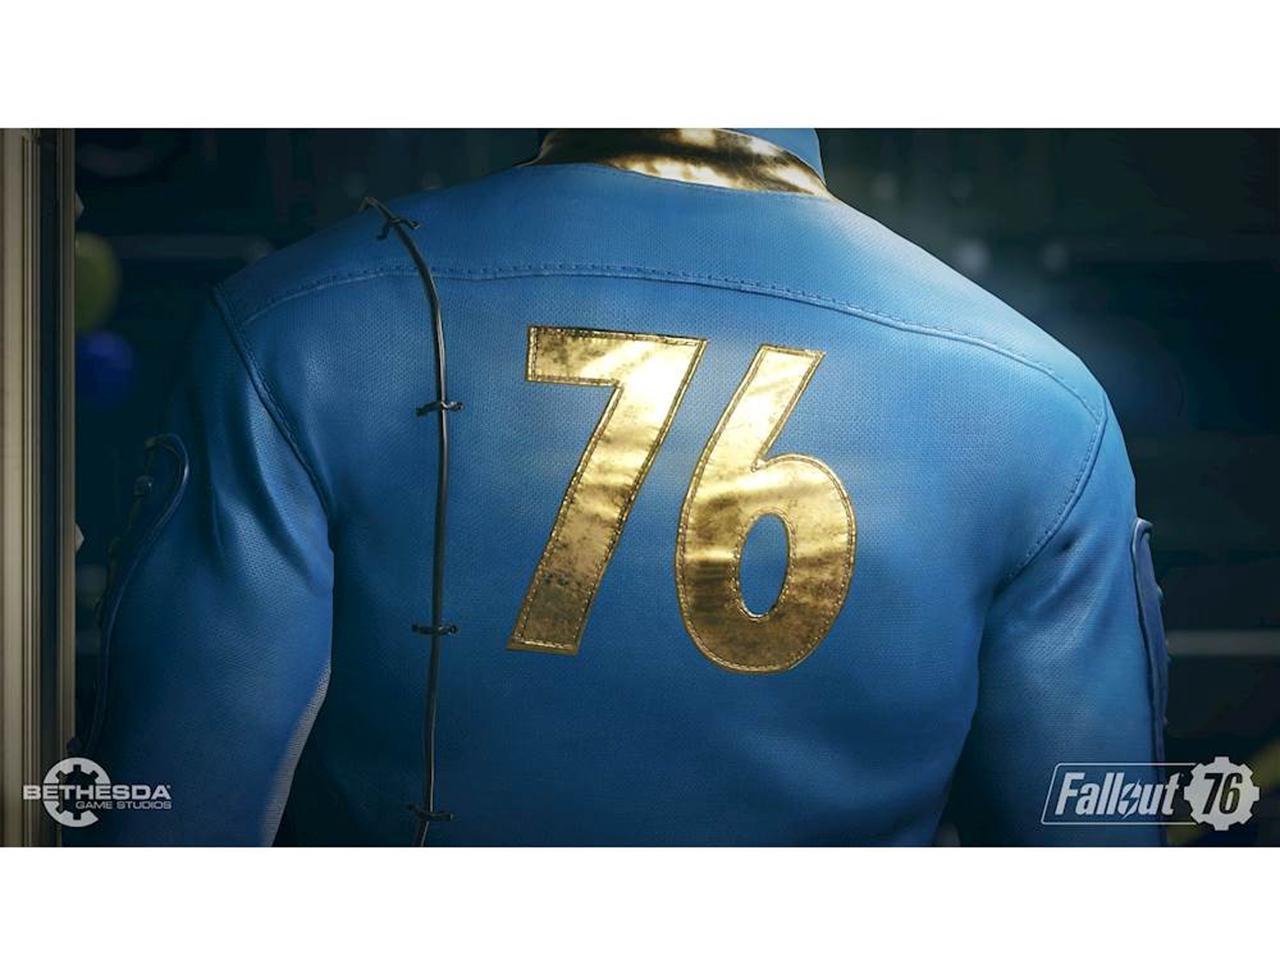 nuclear key codes fallout 76